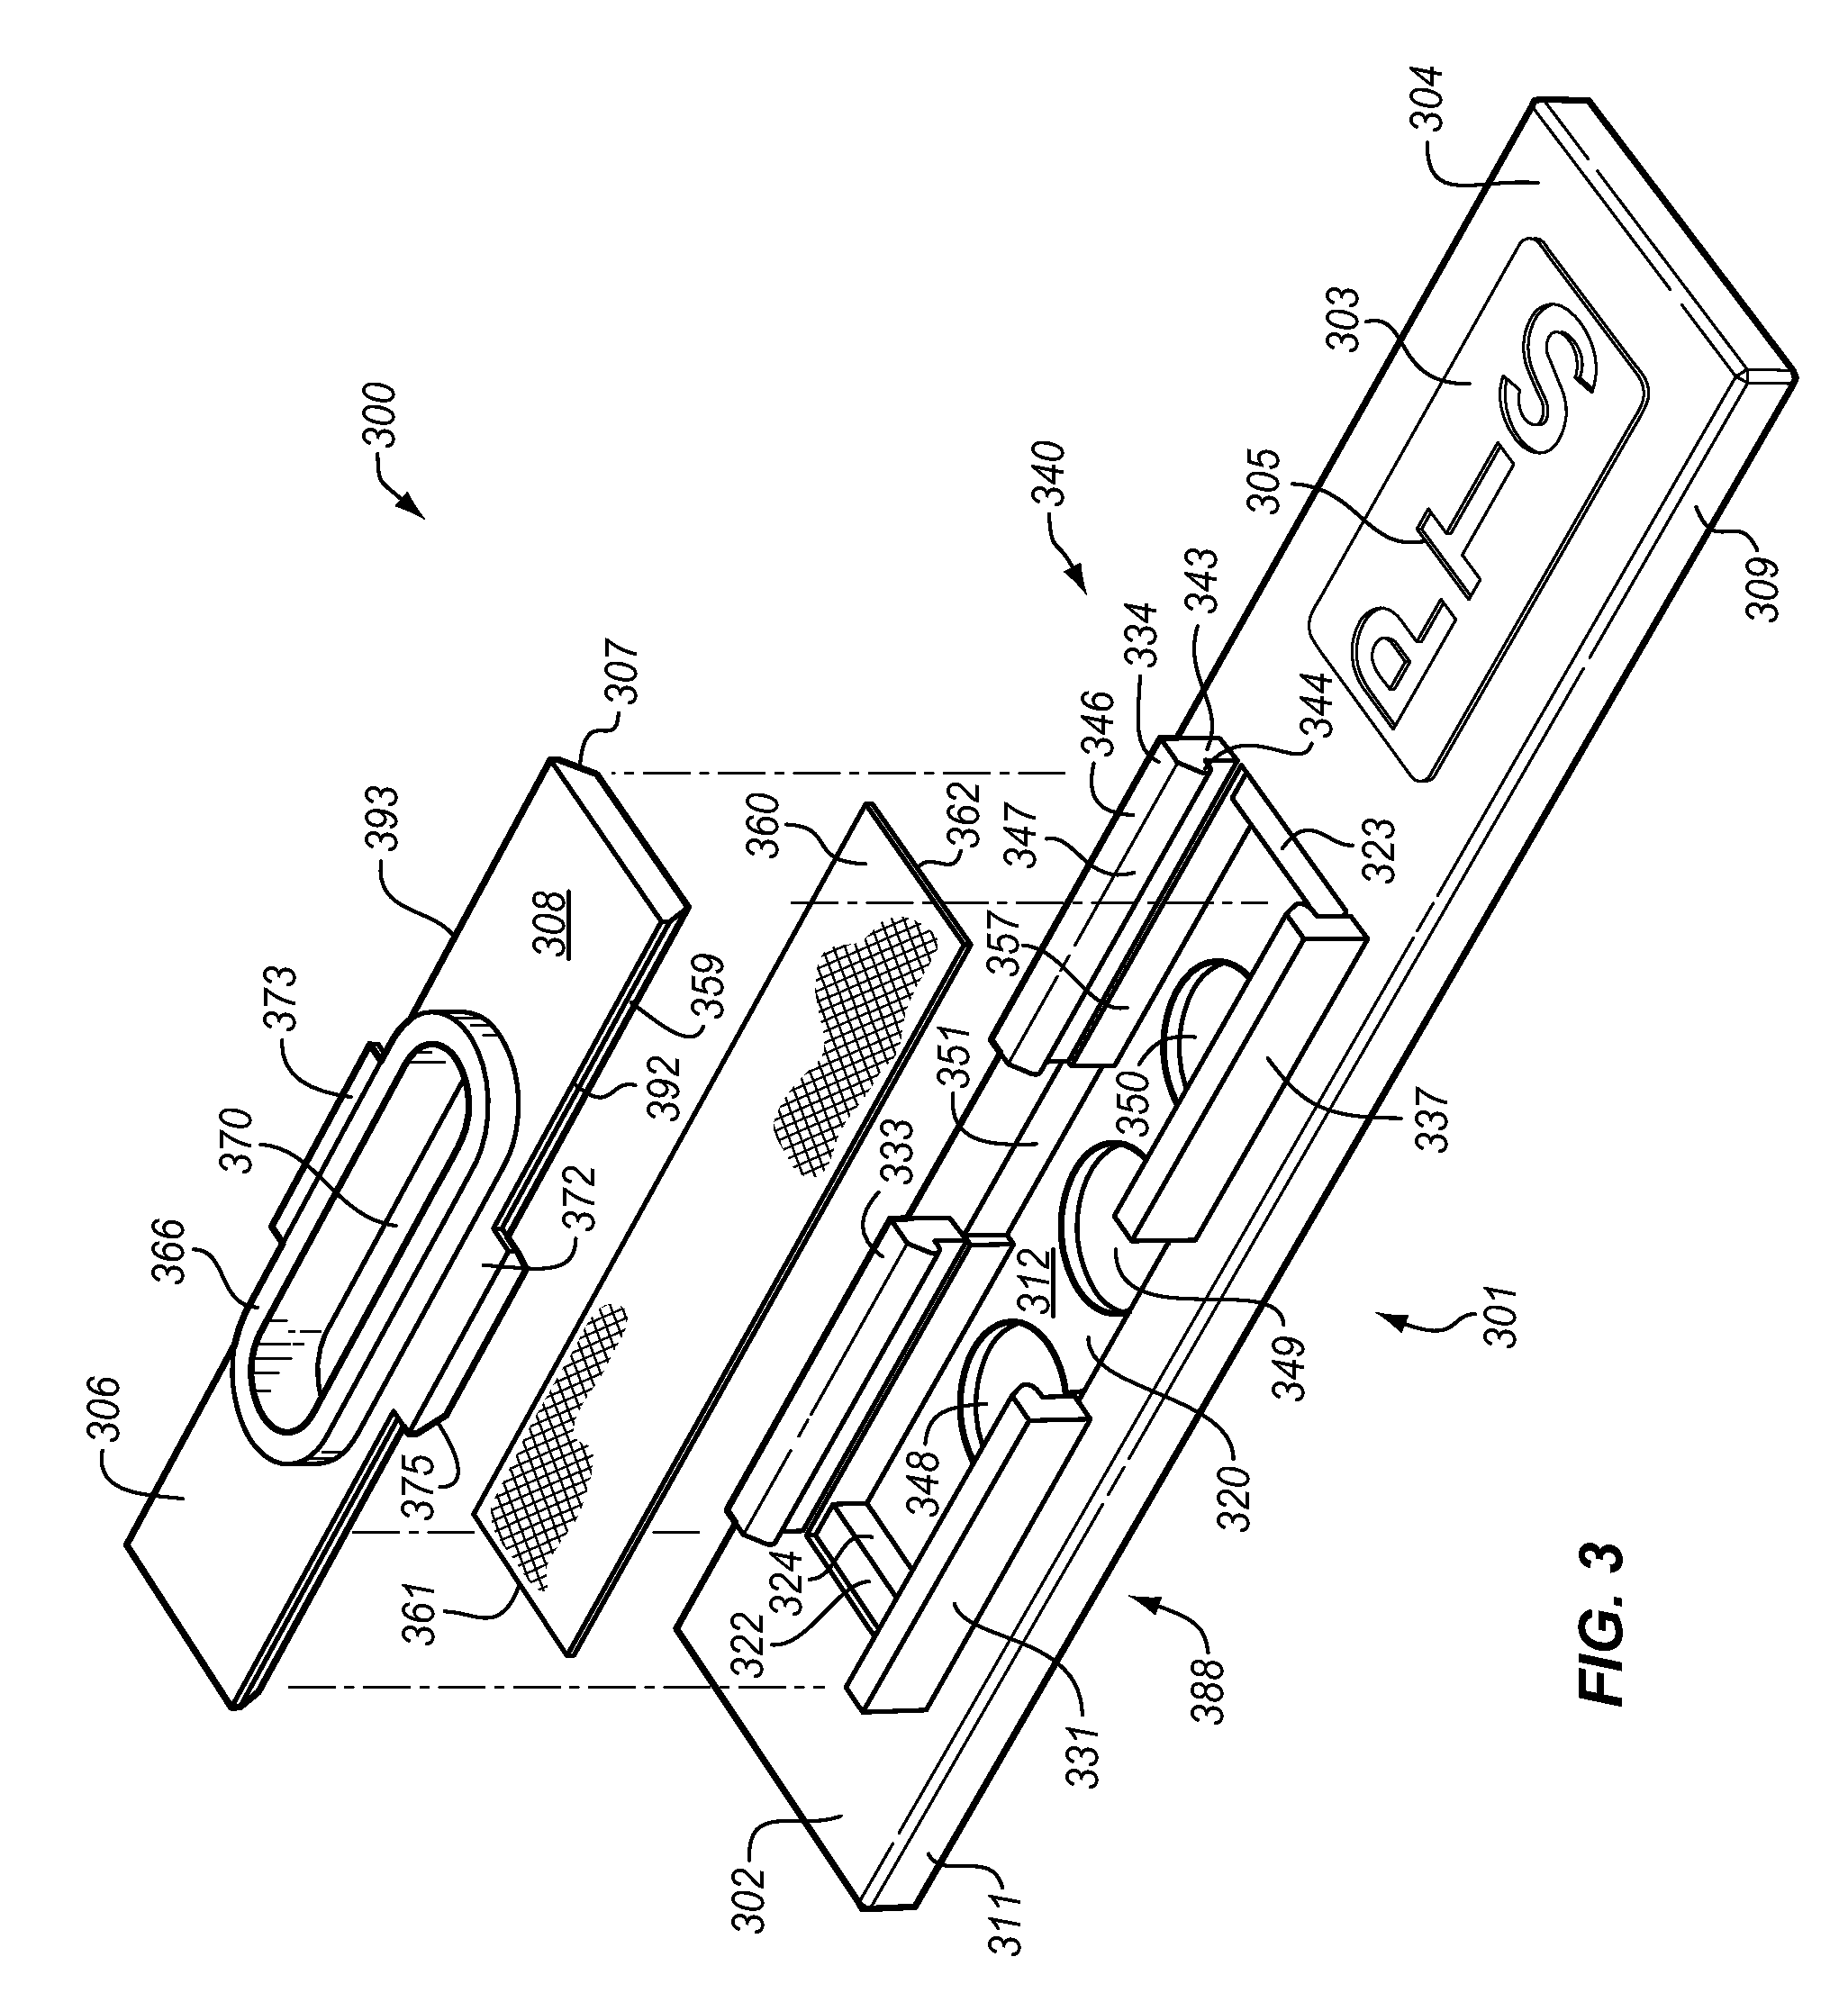 Blood separation system and method for a dry test strip